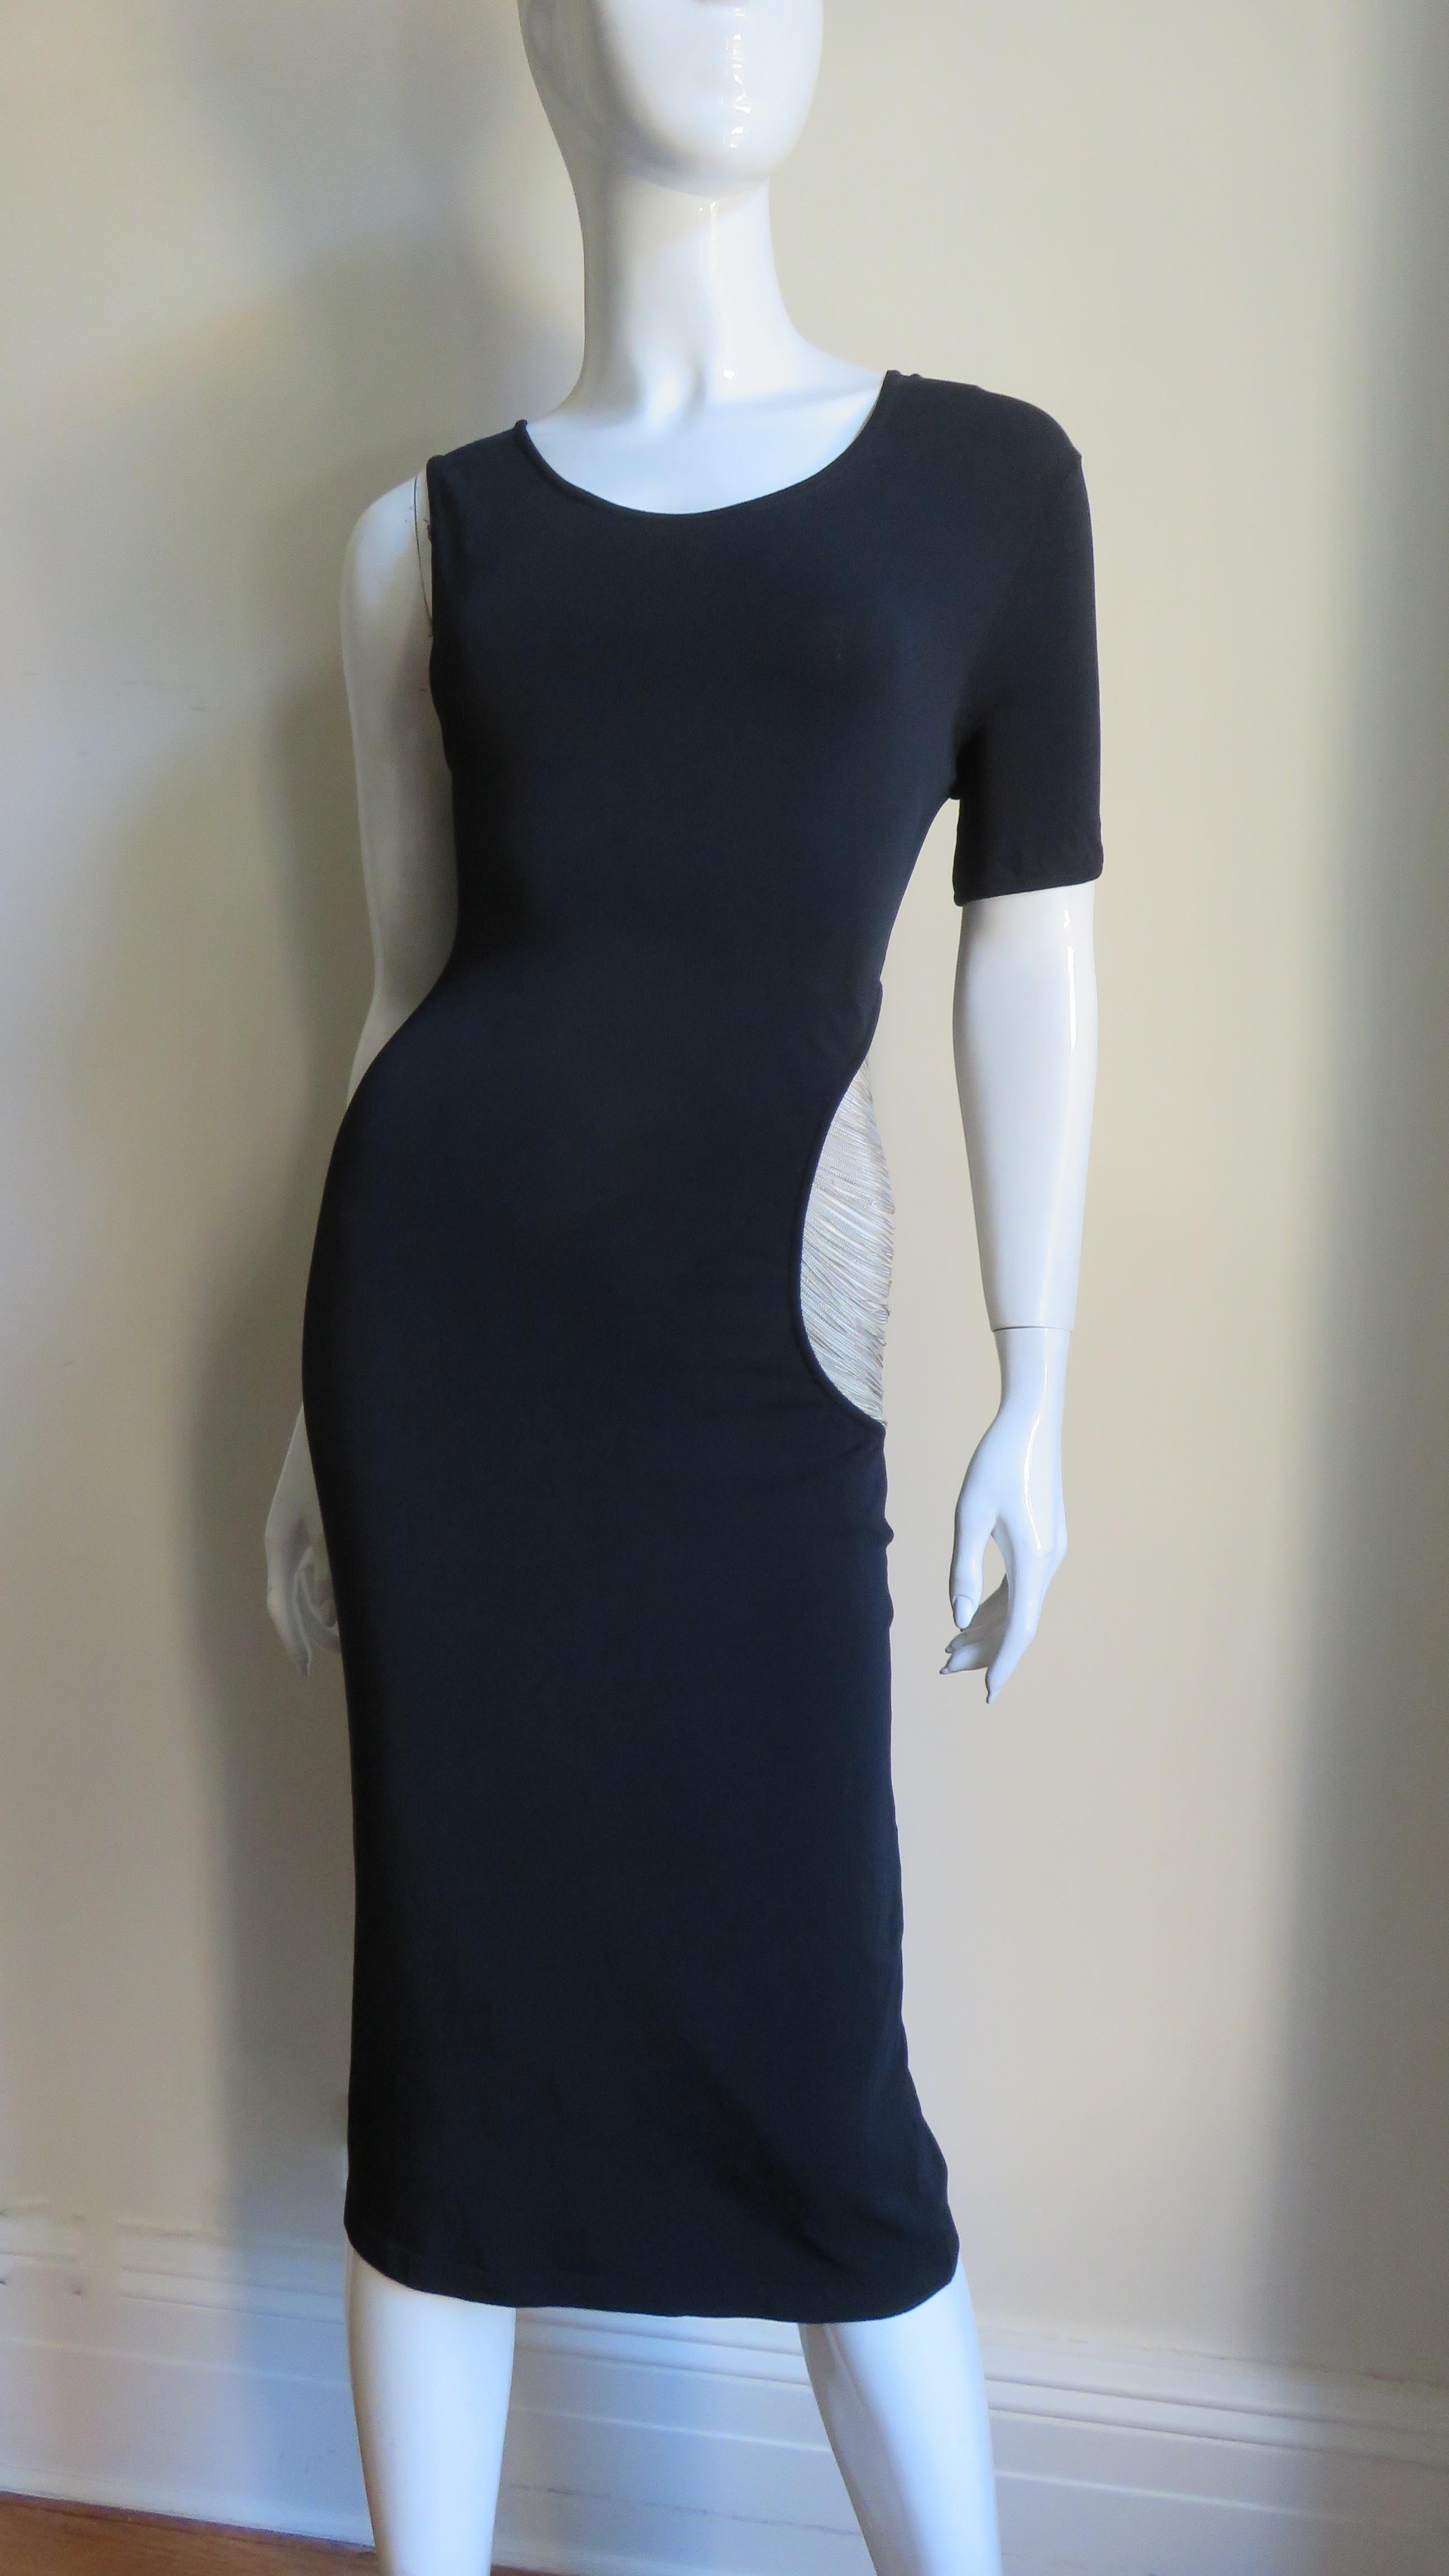 Alexander McQueen Asymmetric Dress with Chain Cut out For Sale 2